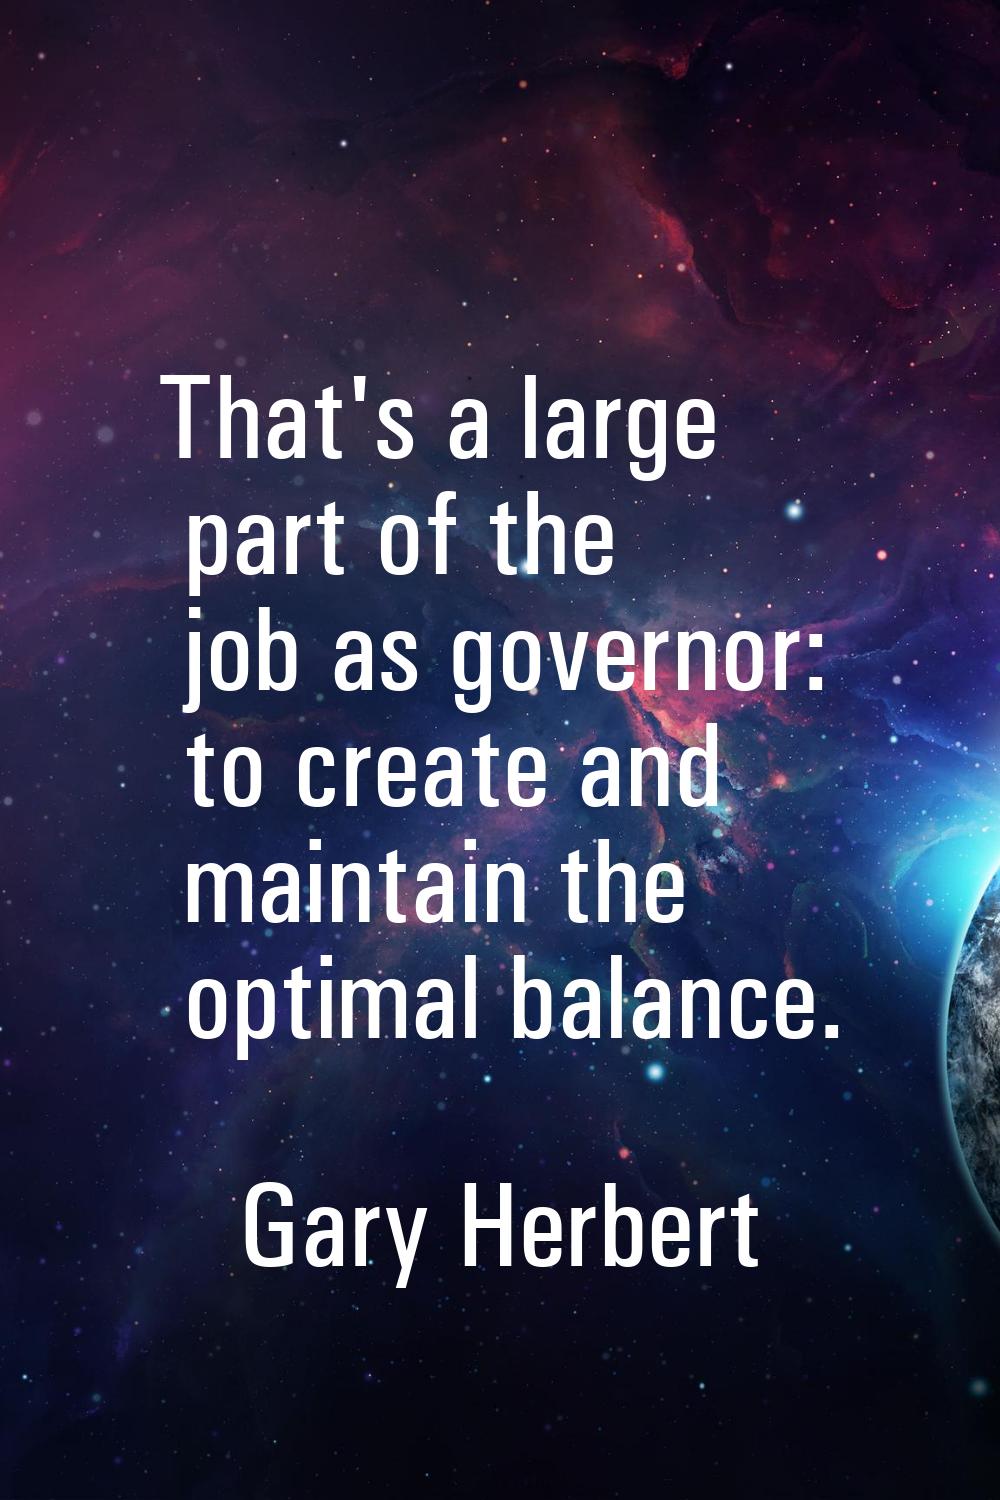 That's a large part of the job as governor: to create and maintain the optimal balance.